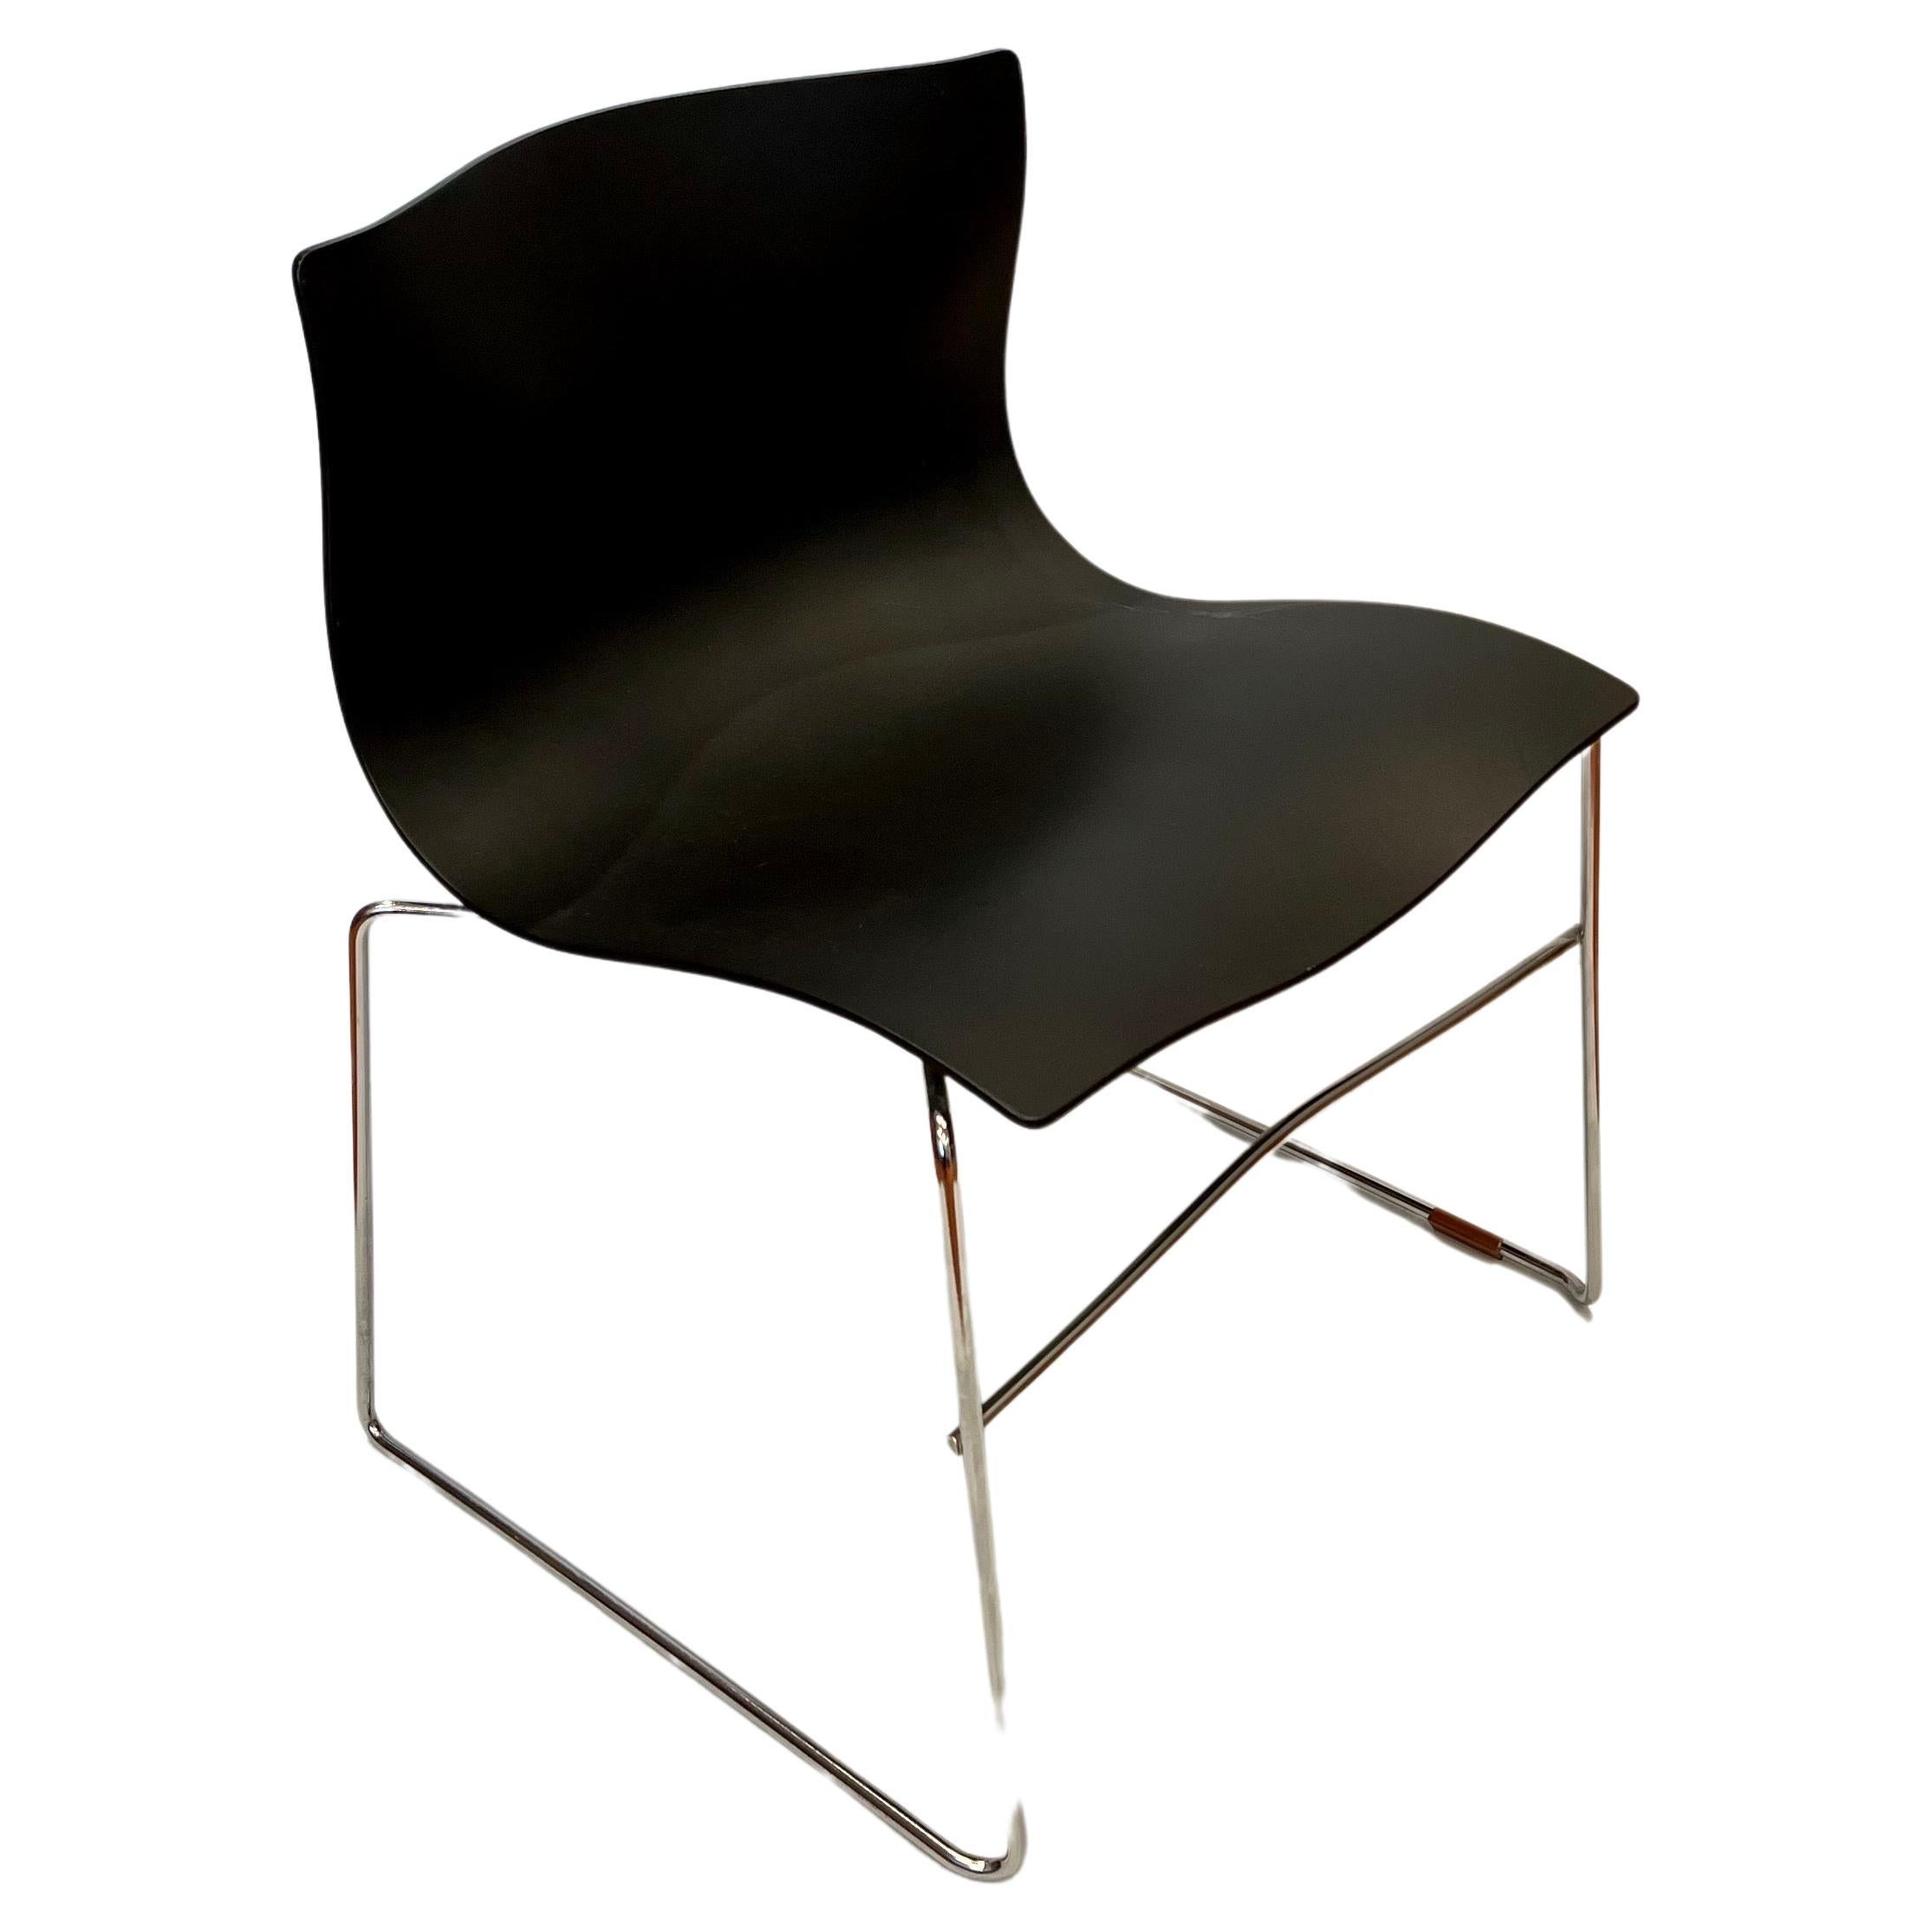 A great set of 4 chairs designed by Massimo Vignelli for Knoll, circa 1983, for Knoll studio great condition complete with rubbers chrome has been polished, the seats are very clean these chairs are nice and comfy. These chairs are stackable for